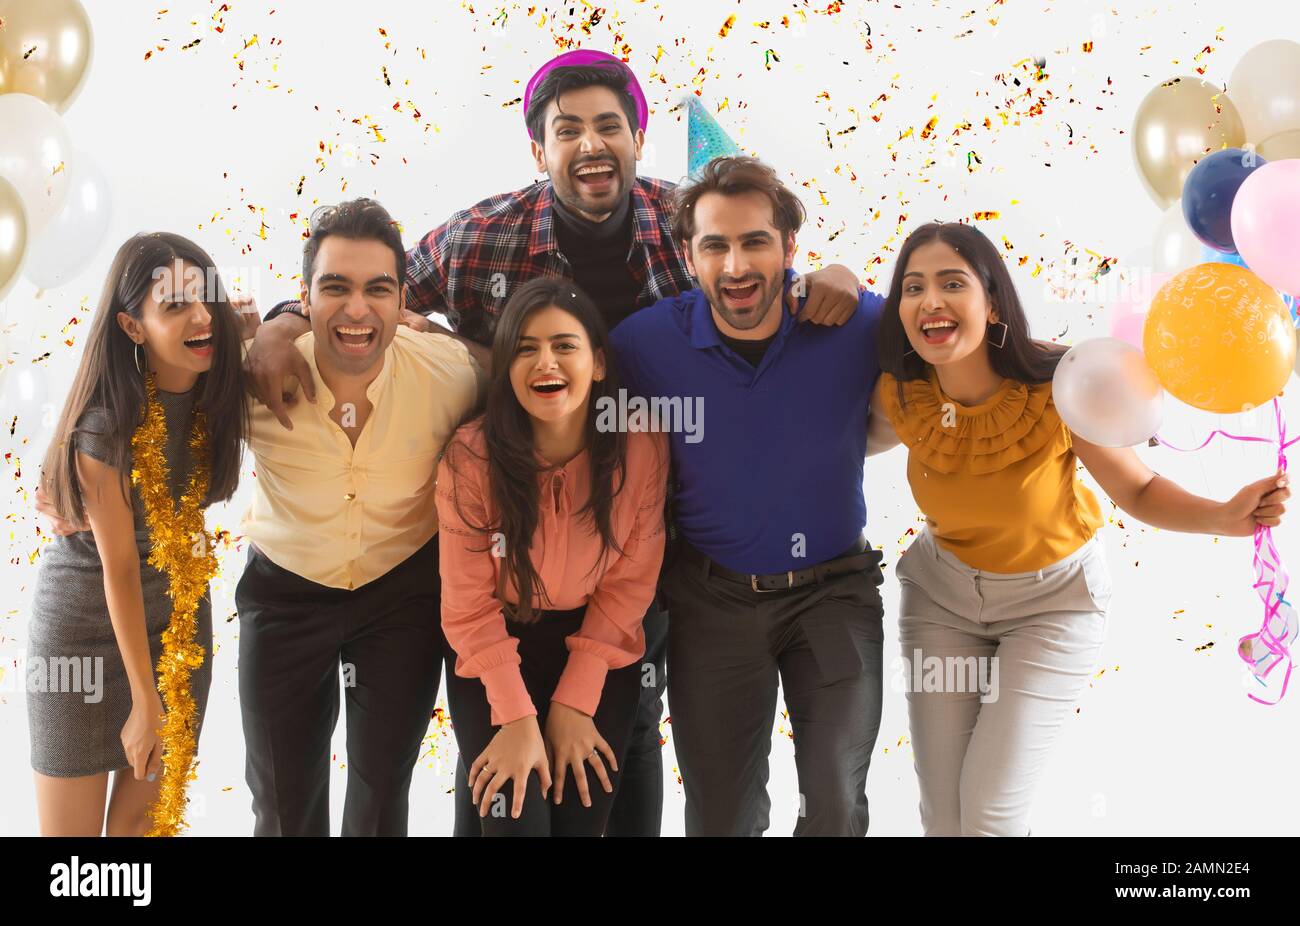 Group of friends having fun at a party. Stock Photo